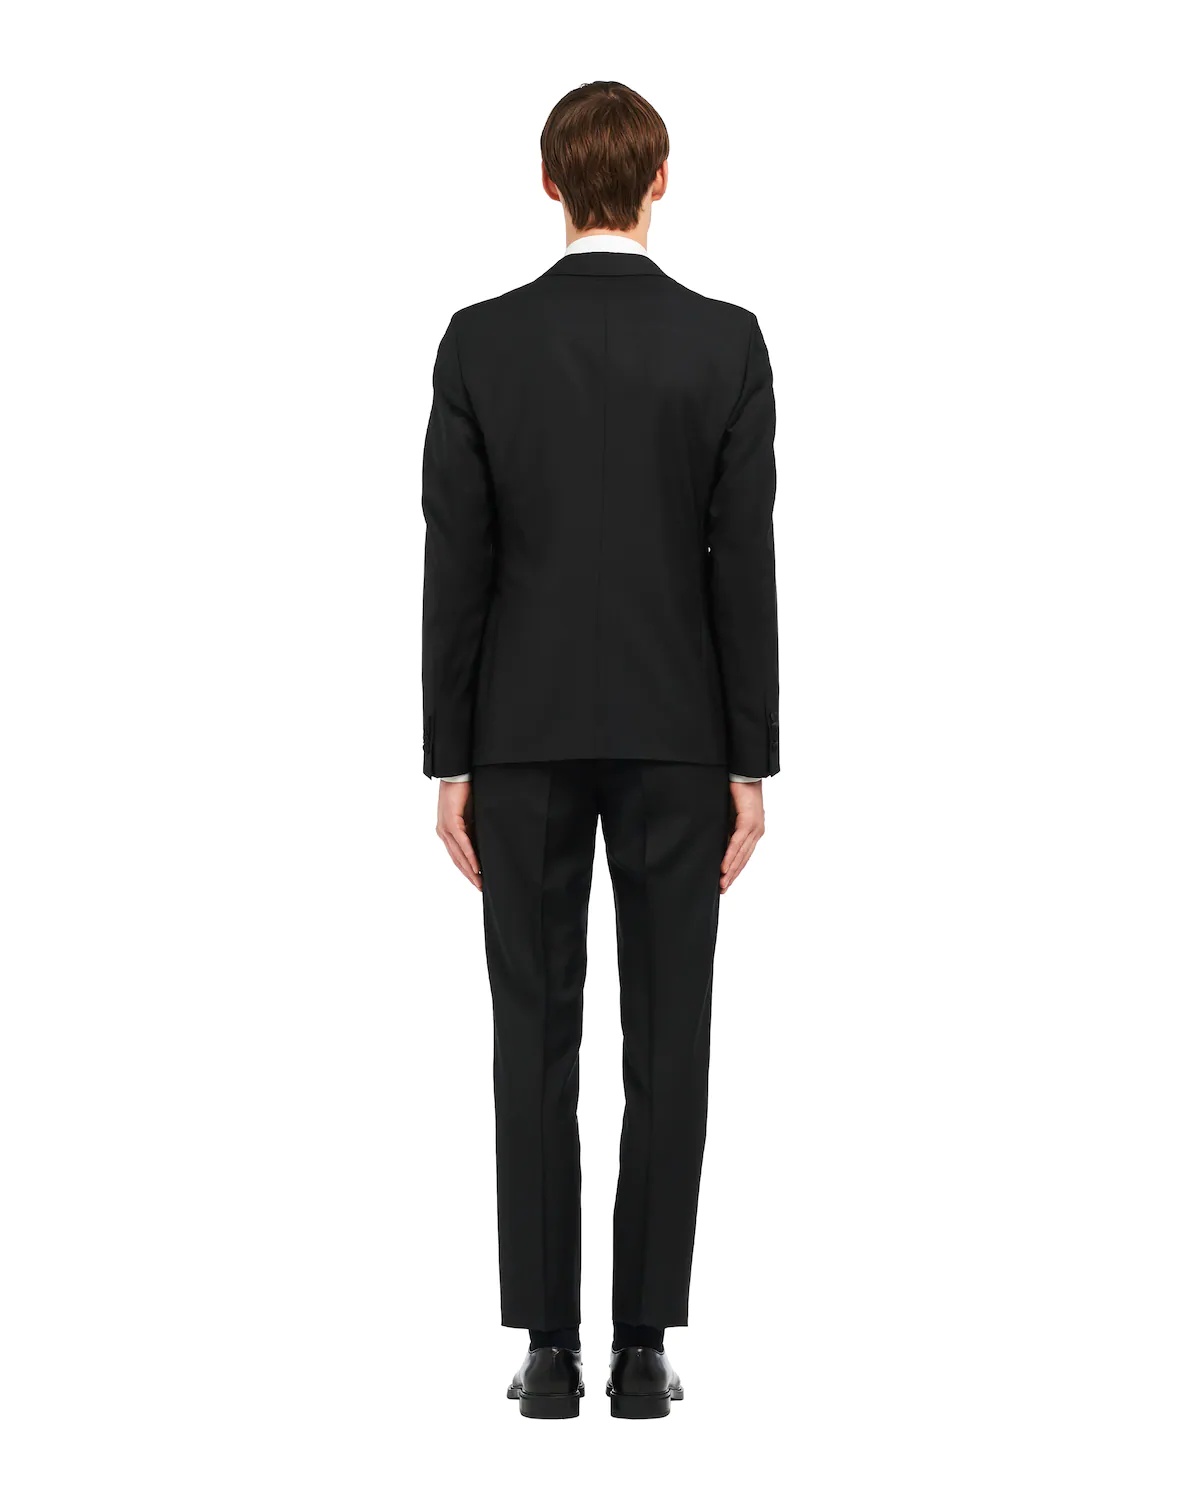 Singled-breasted two-button wool mohair tuxedo - 4